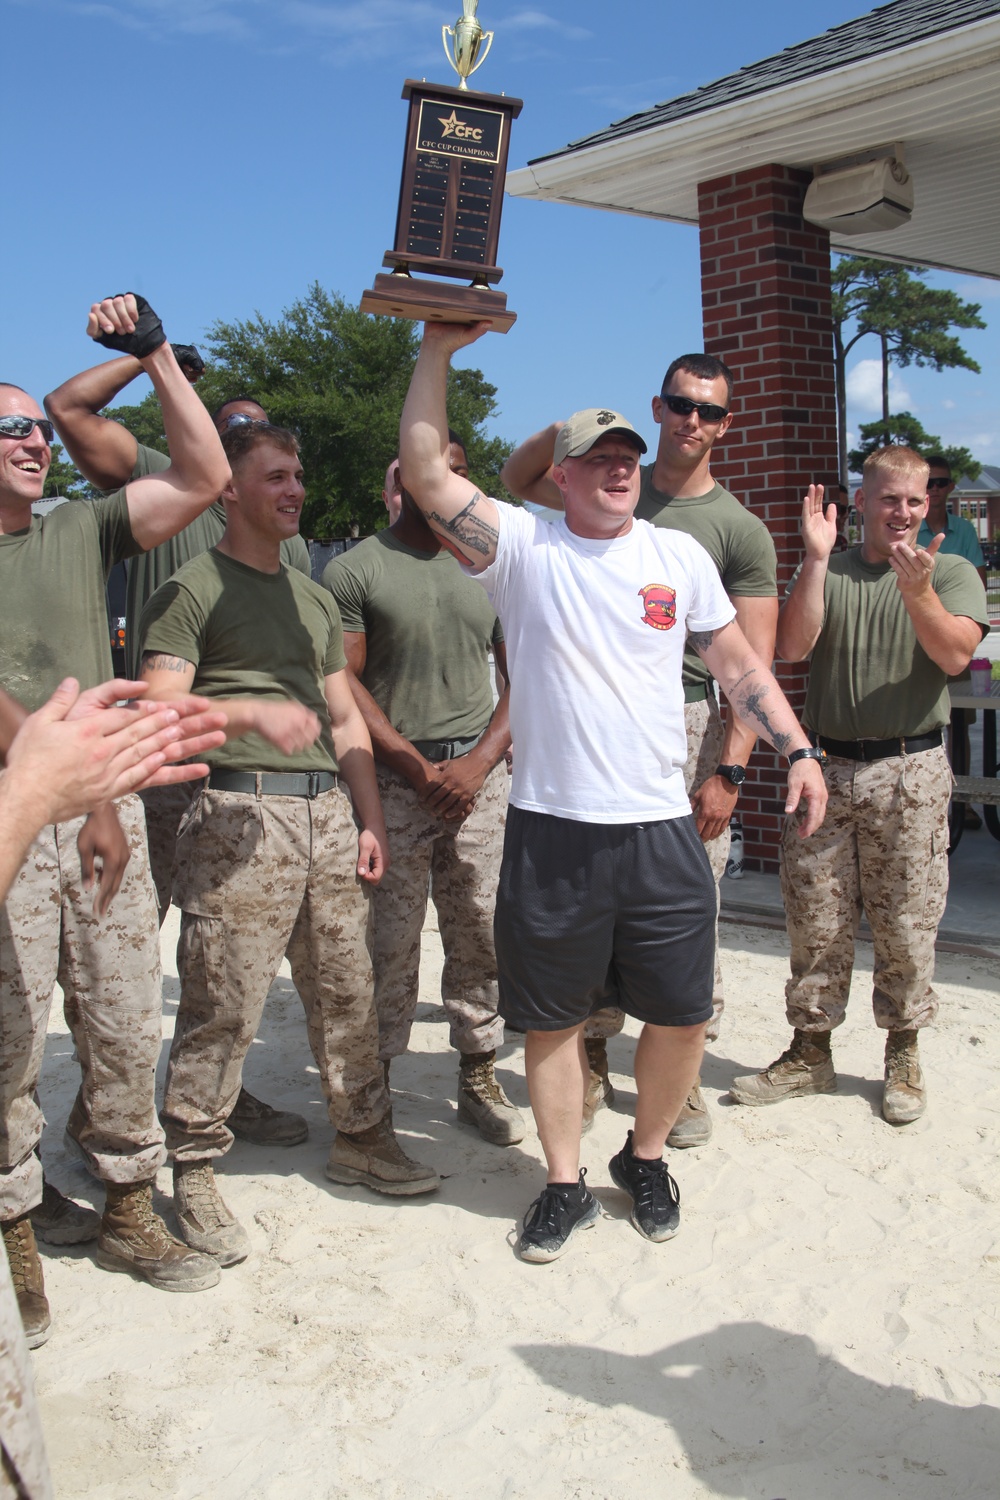 Cherry Point kicks off Combined Federal Campaign with tug of war competition